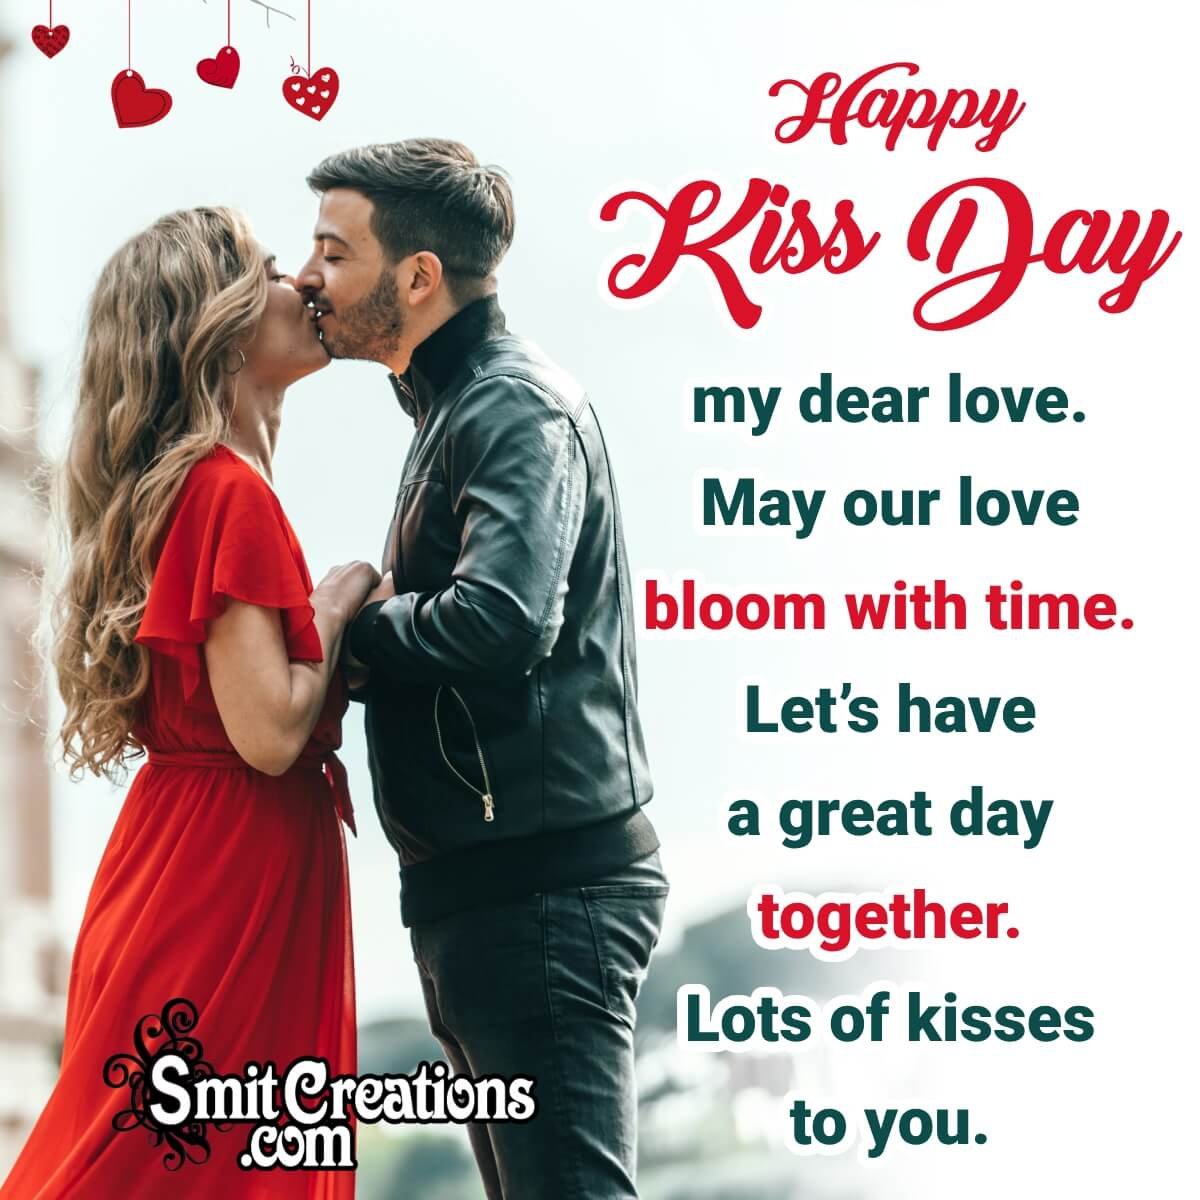 Happy Kiss Day Wishes For My Love